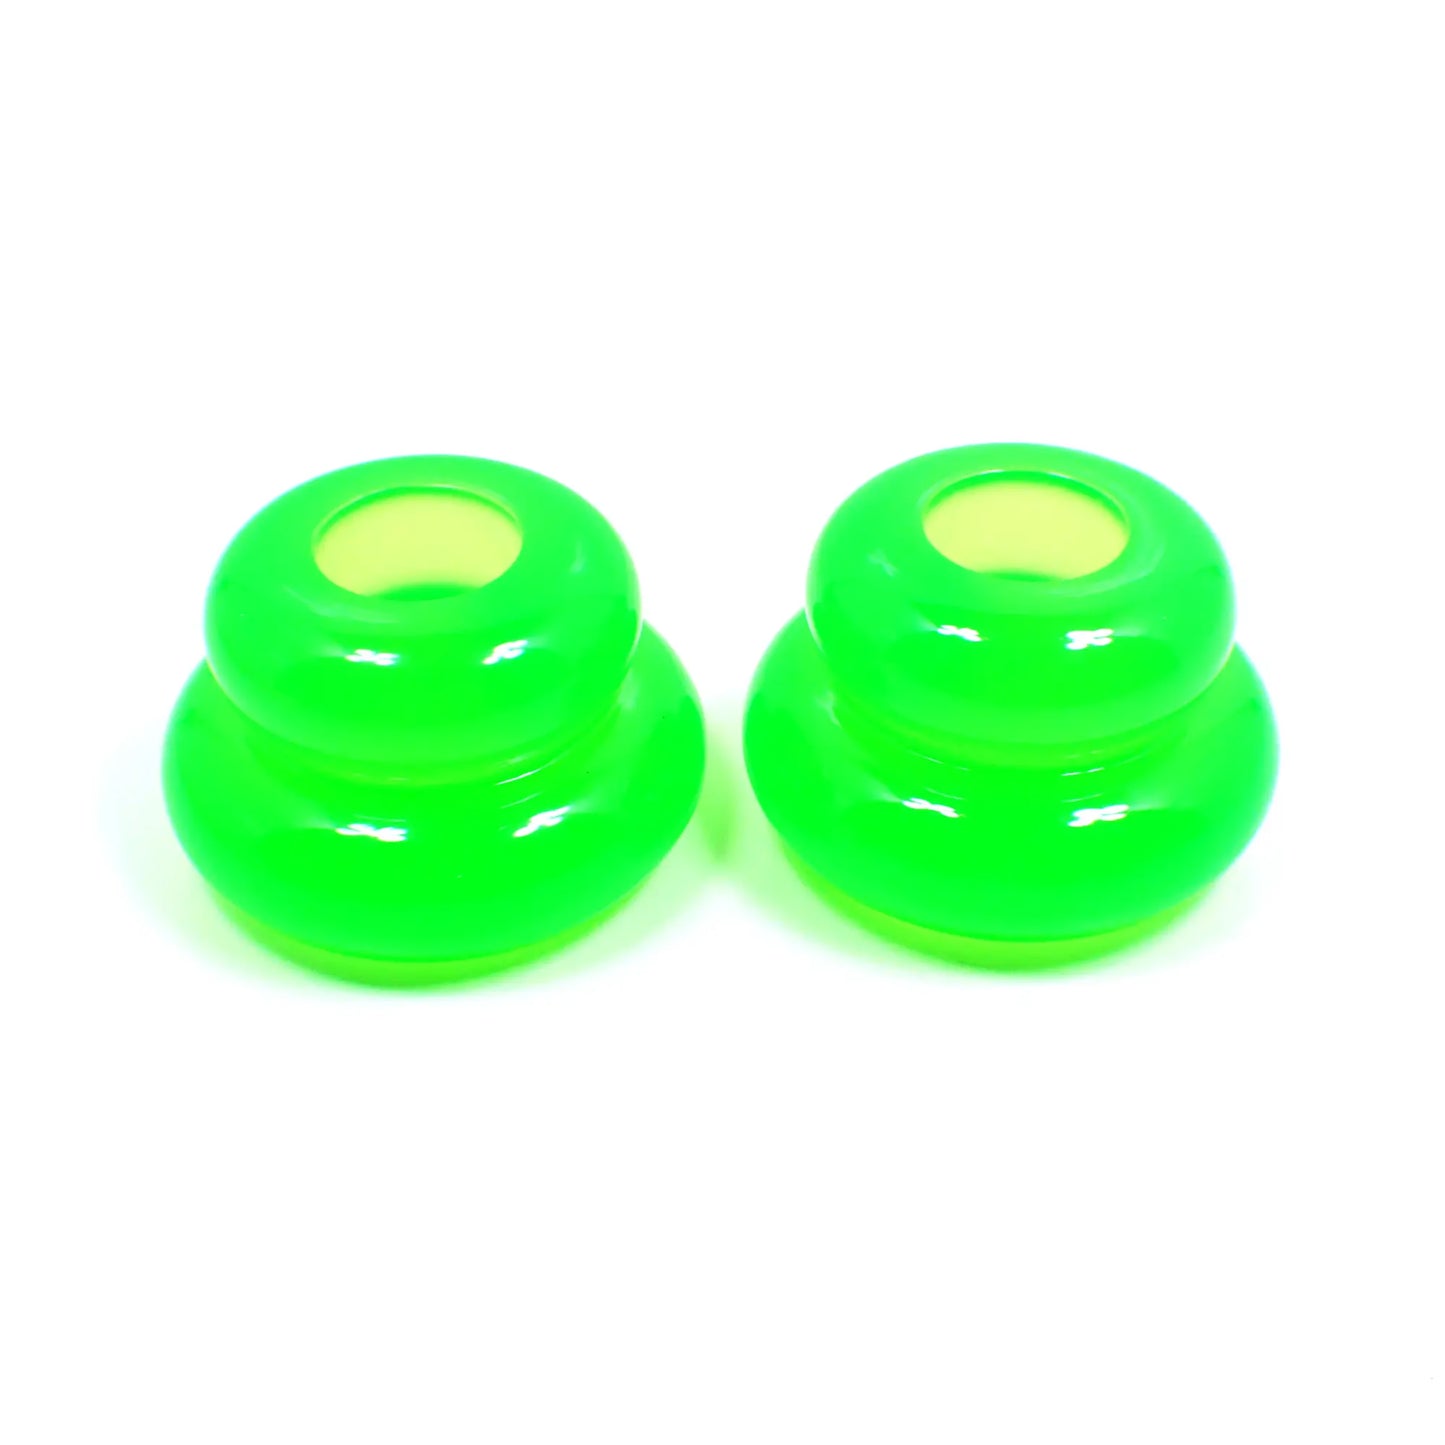 Set of Two Bright Neon Green Resin Handmade Puffy Round Double Ring Candlestick Holders